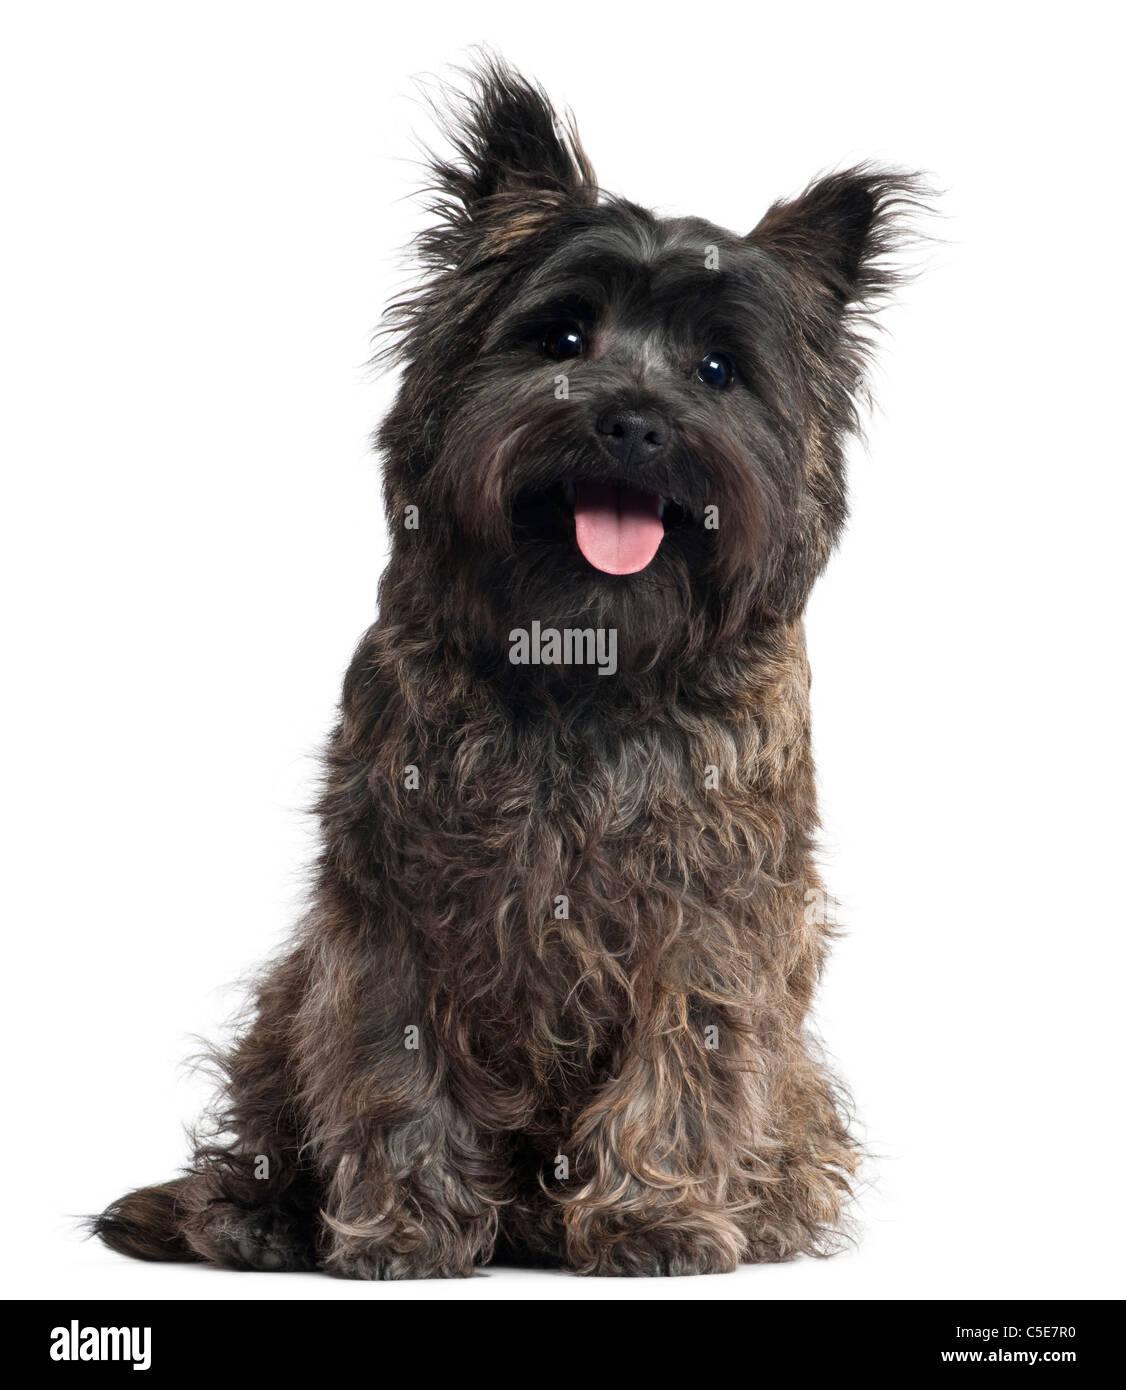 Cairn Terrier, 8 months old, sitting in front of white background Stock Photo